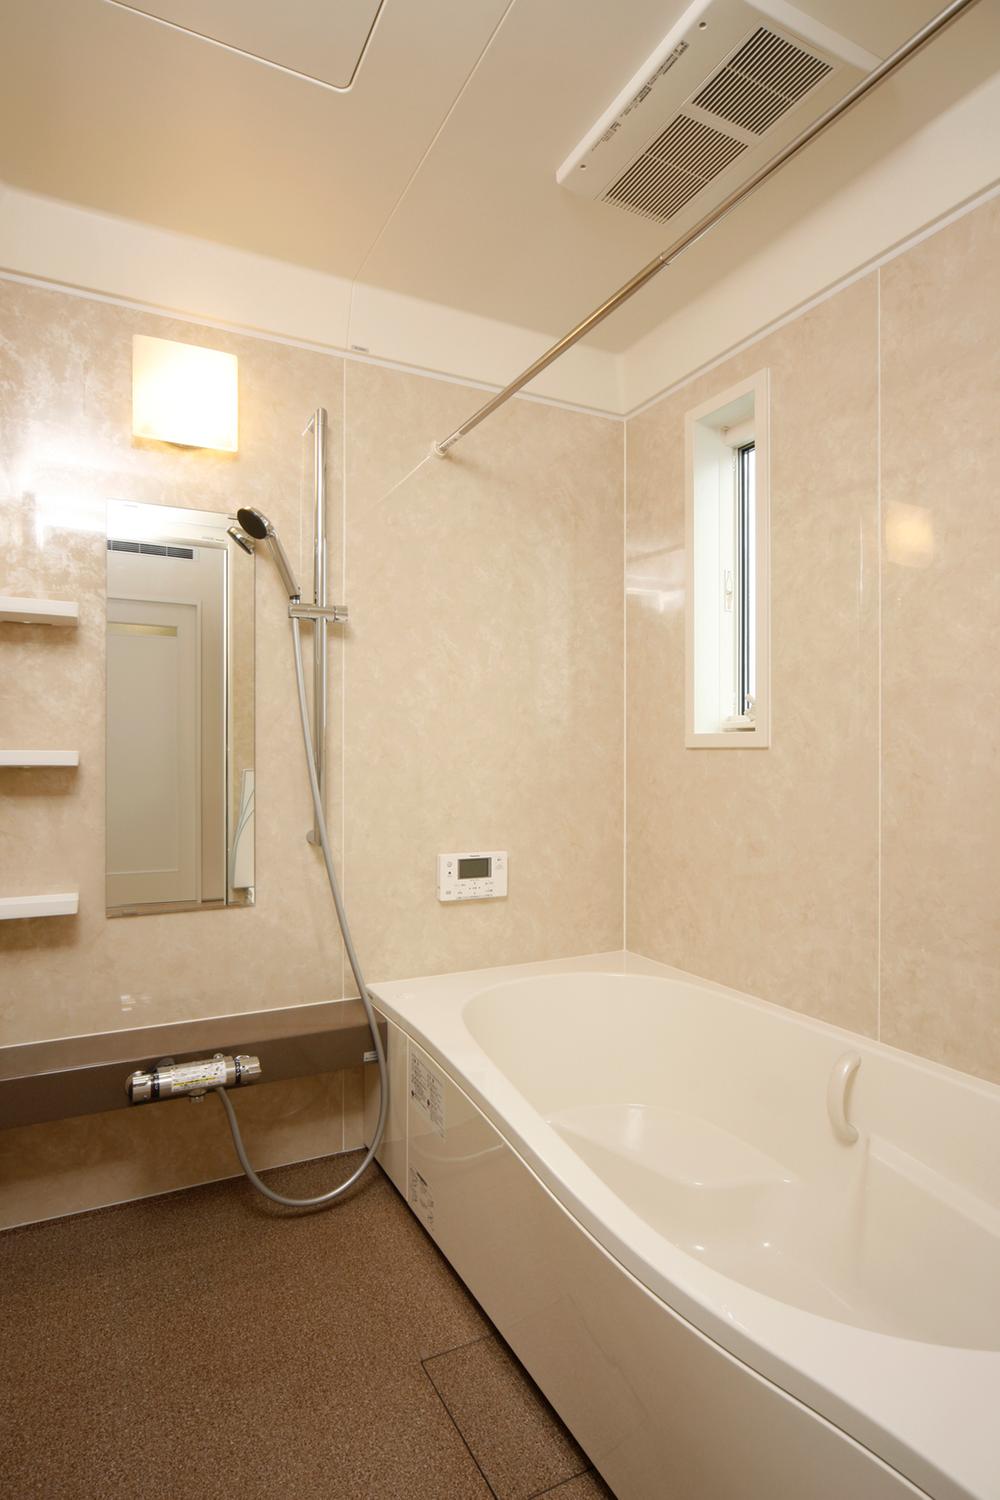 Bathroom. Bathing of 1 pyeong type that can be relaxed bathing!